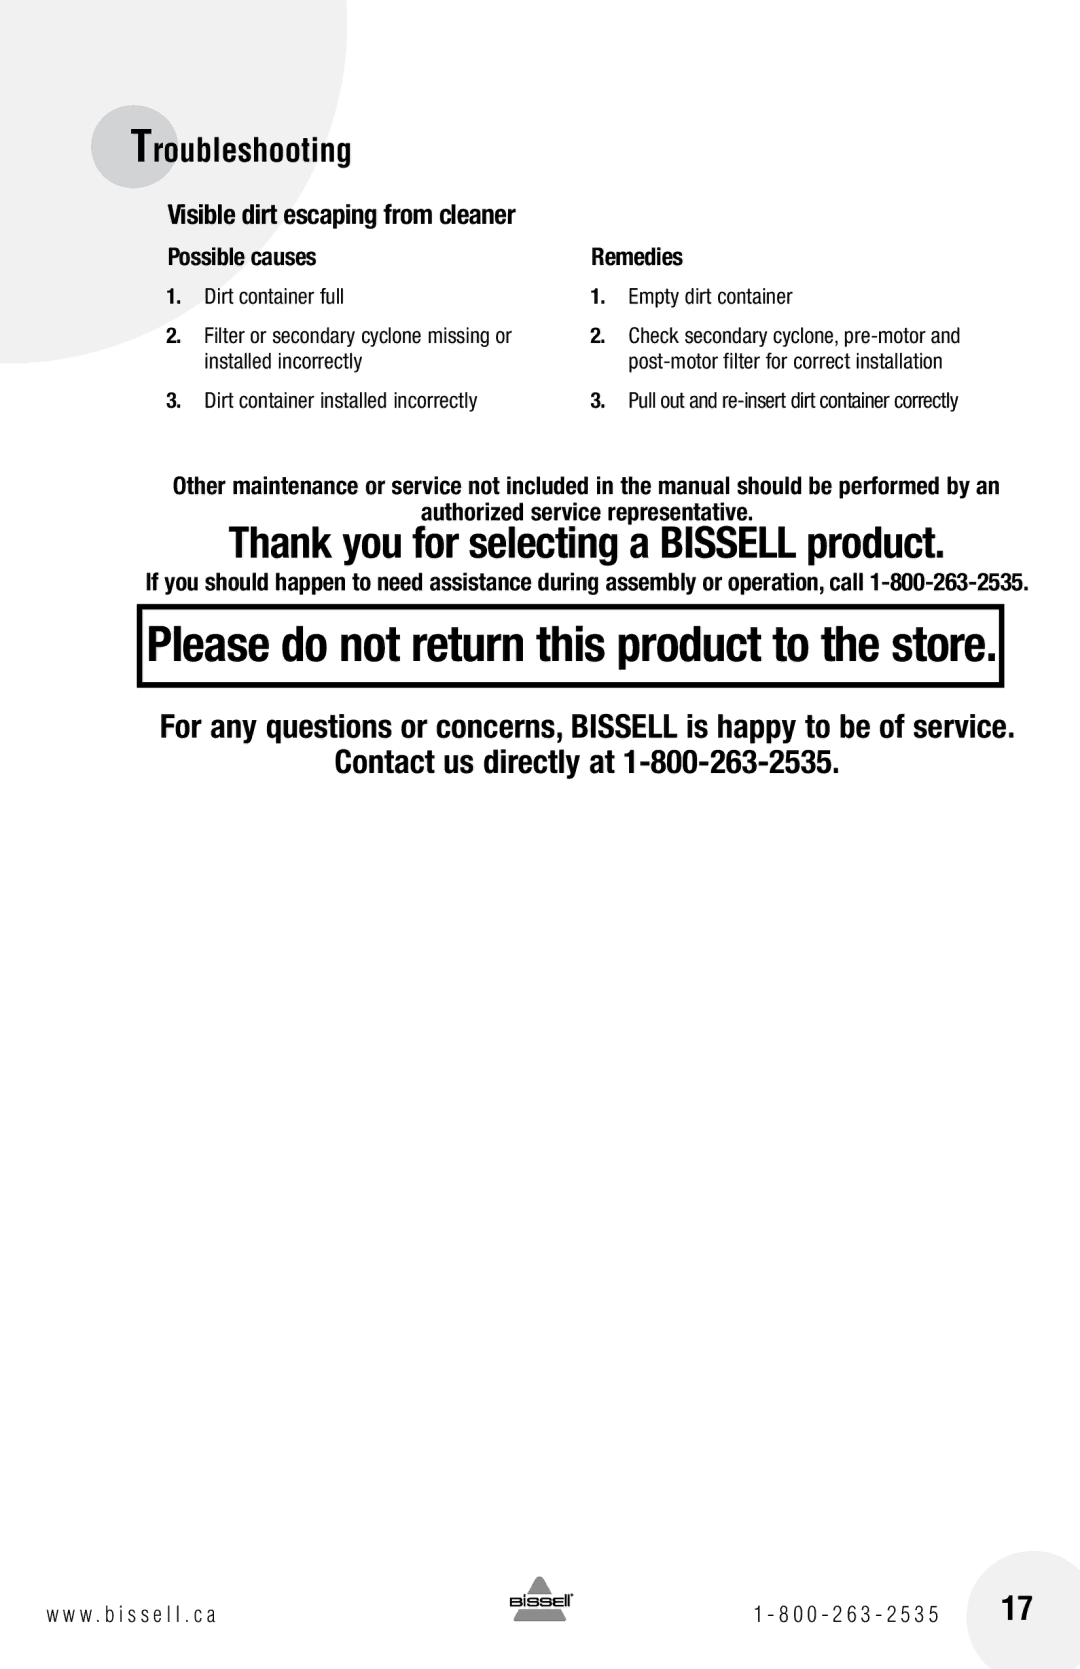 Bissell 18Z6 warranty Visible dirt escaping from cleaner, Possible causes Remedies, Authorized service representative 